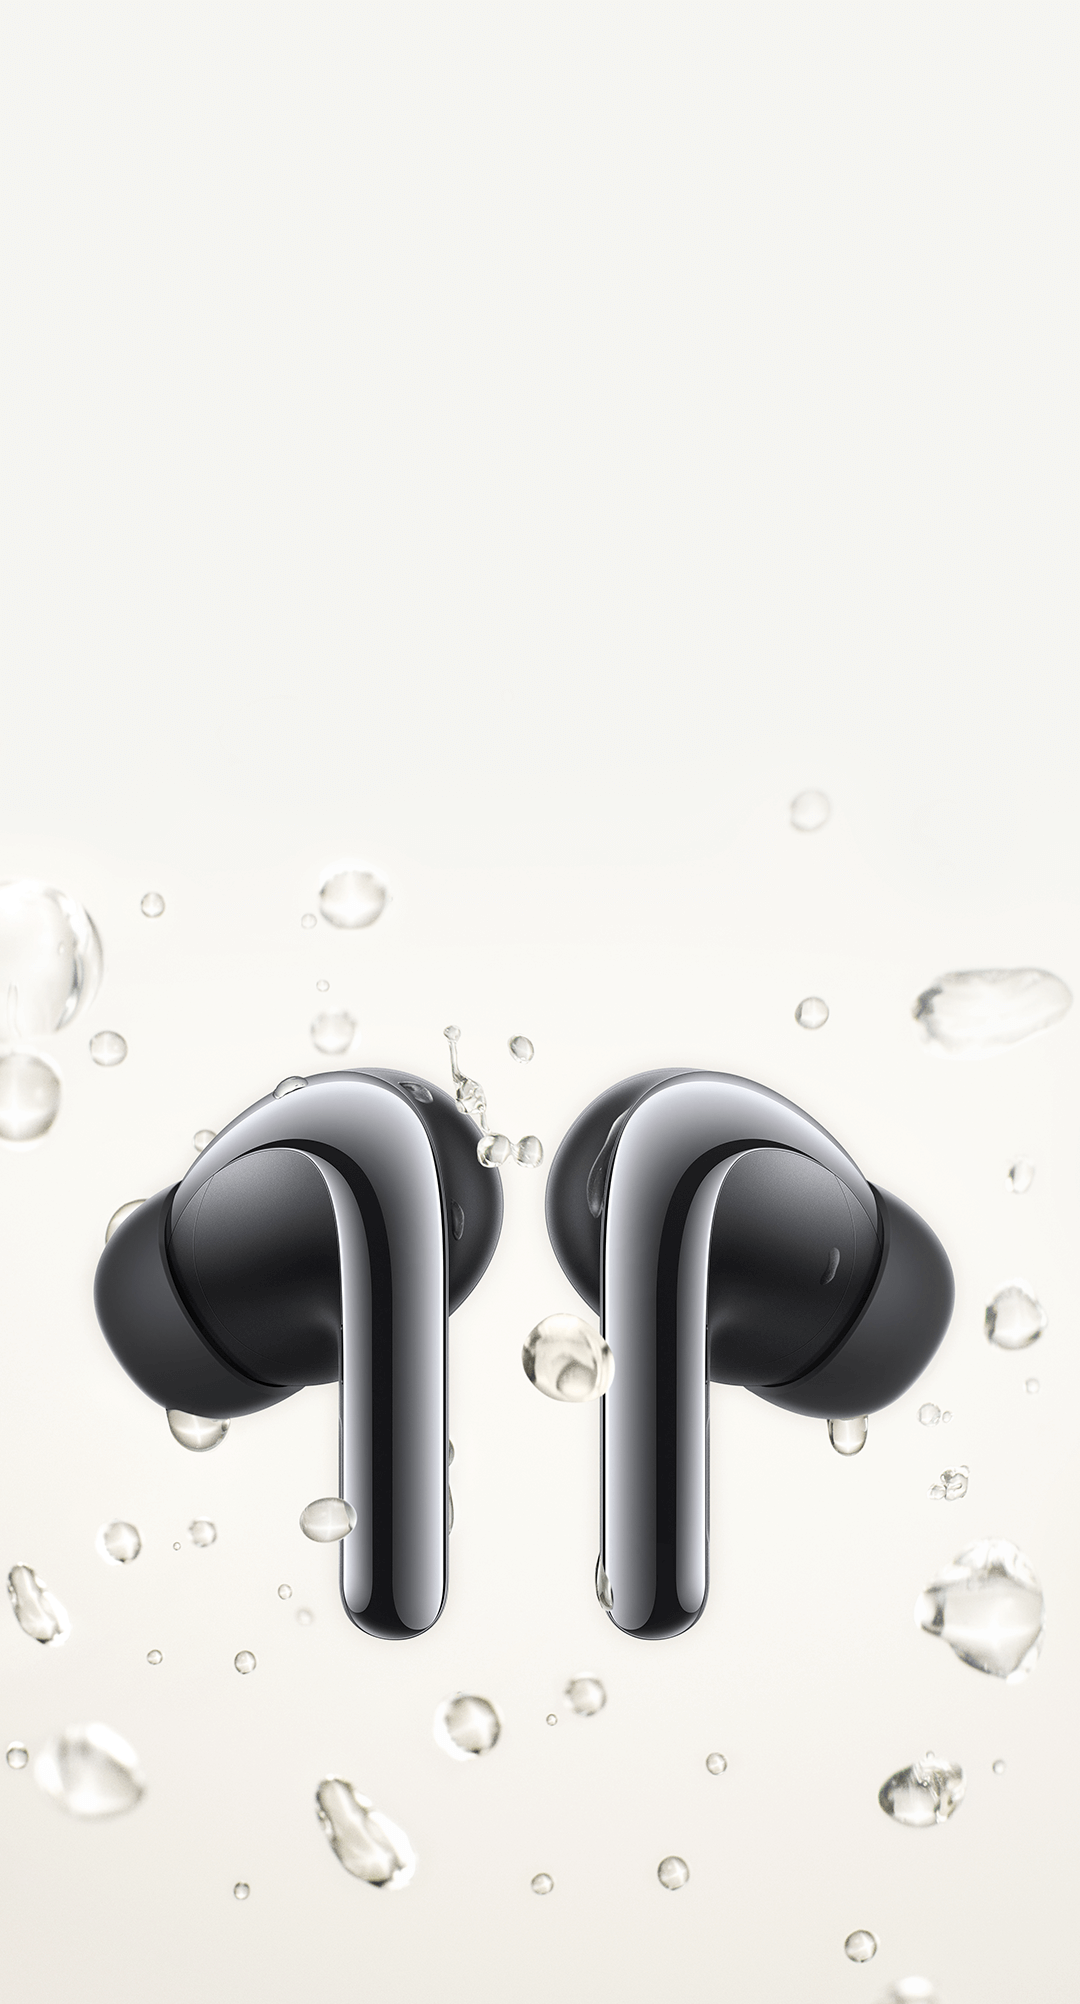 Xiaomi Earbuds – Applications sur Google Play